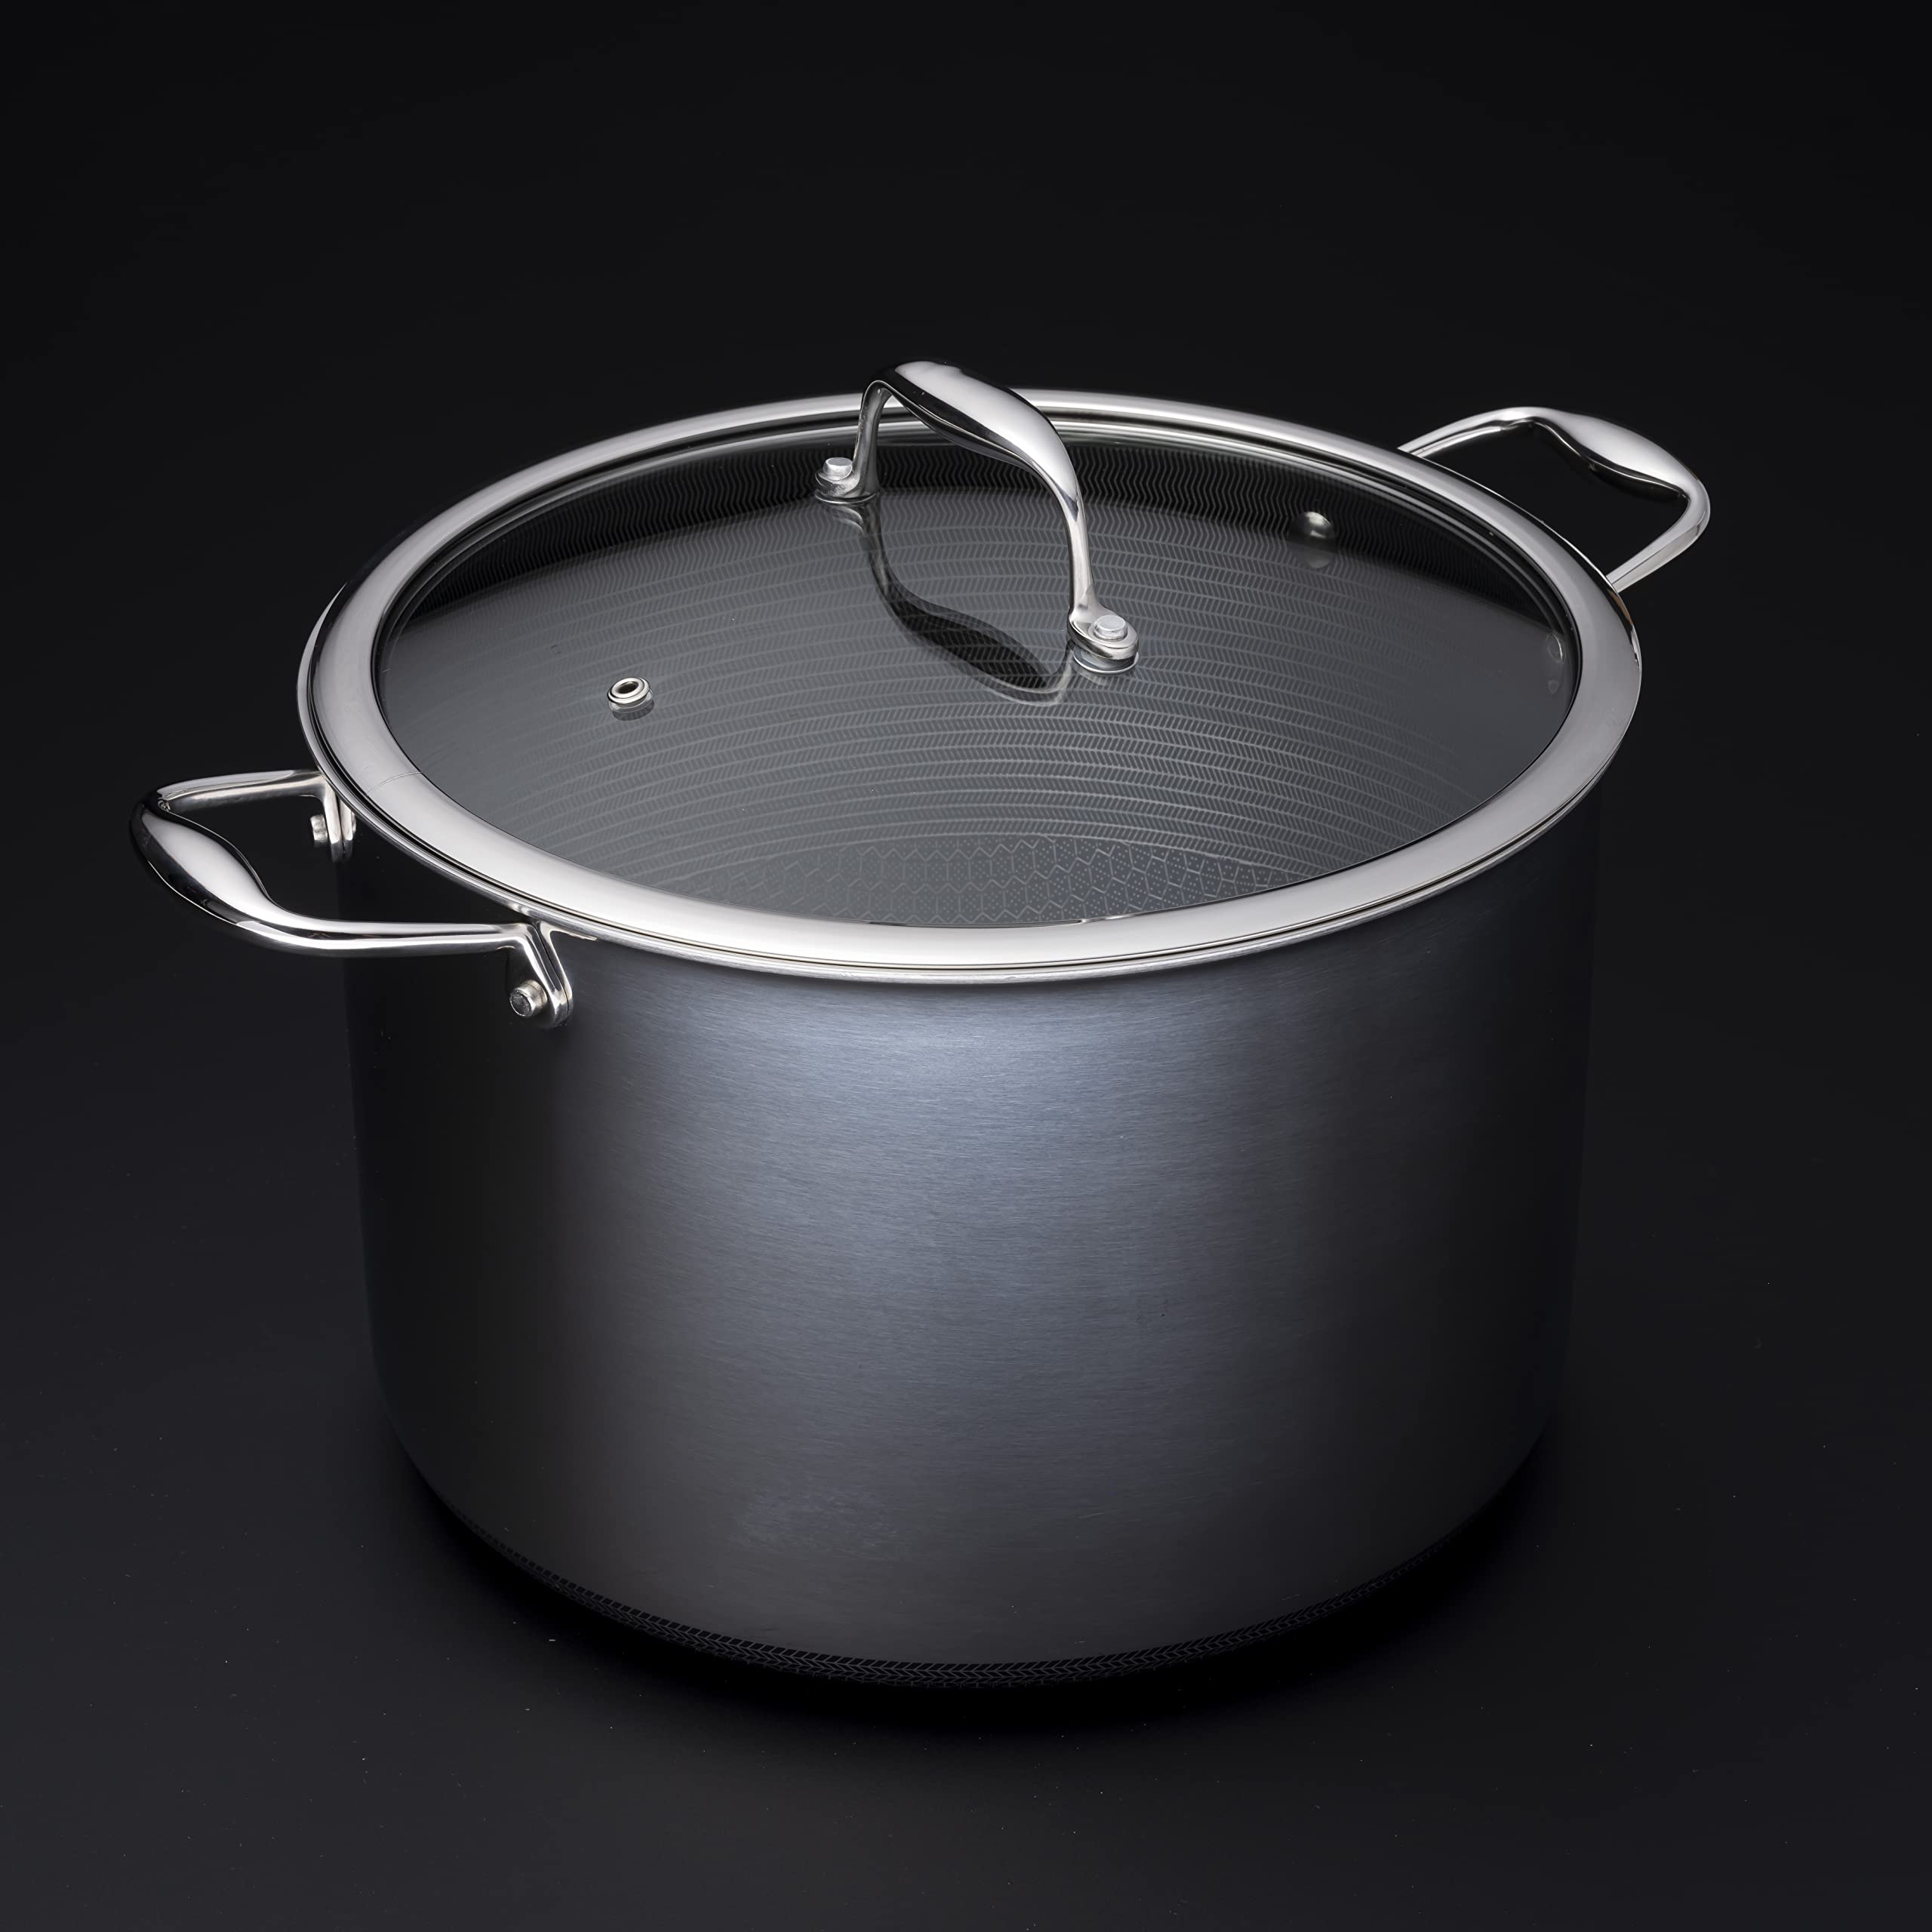 HexClad 10 Quart Hybrid Nonstick Saucepan and Lid, Dishwasher and Oven Friendly, Compatible with All Cooktops